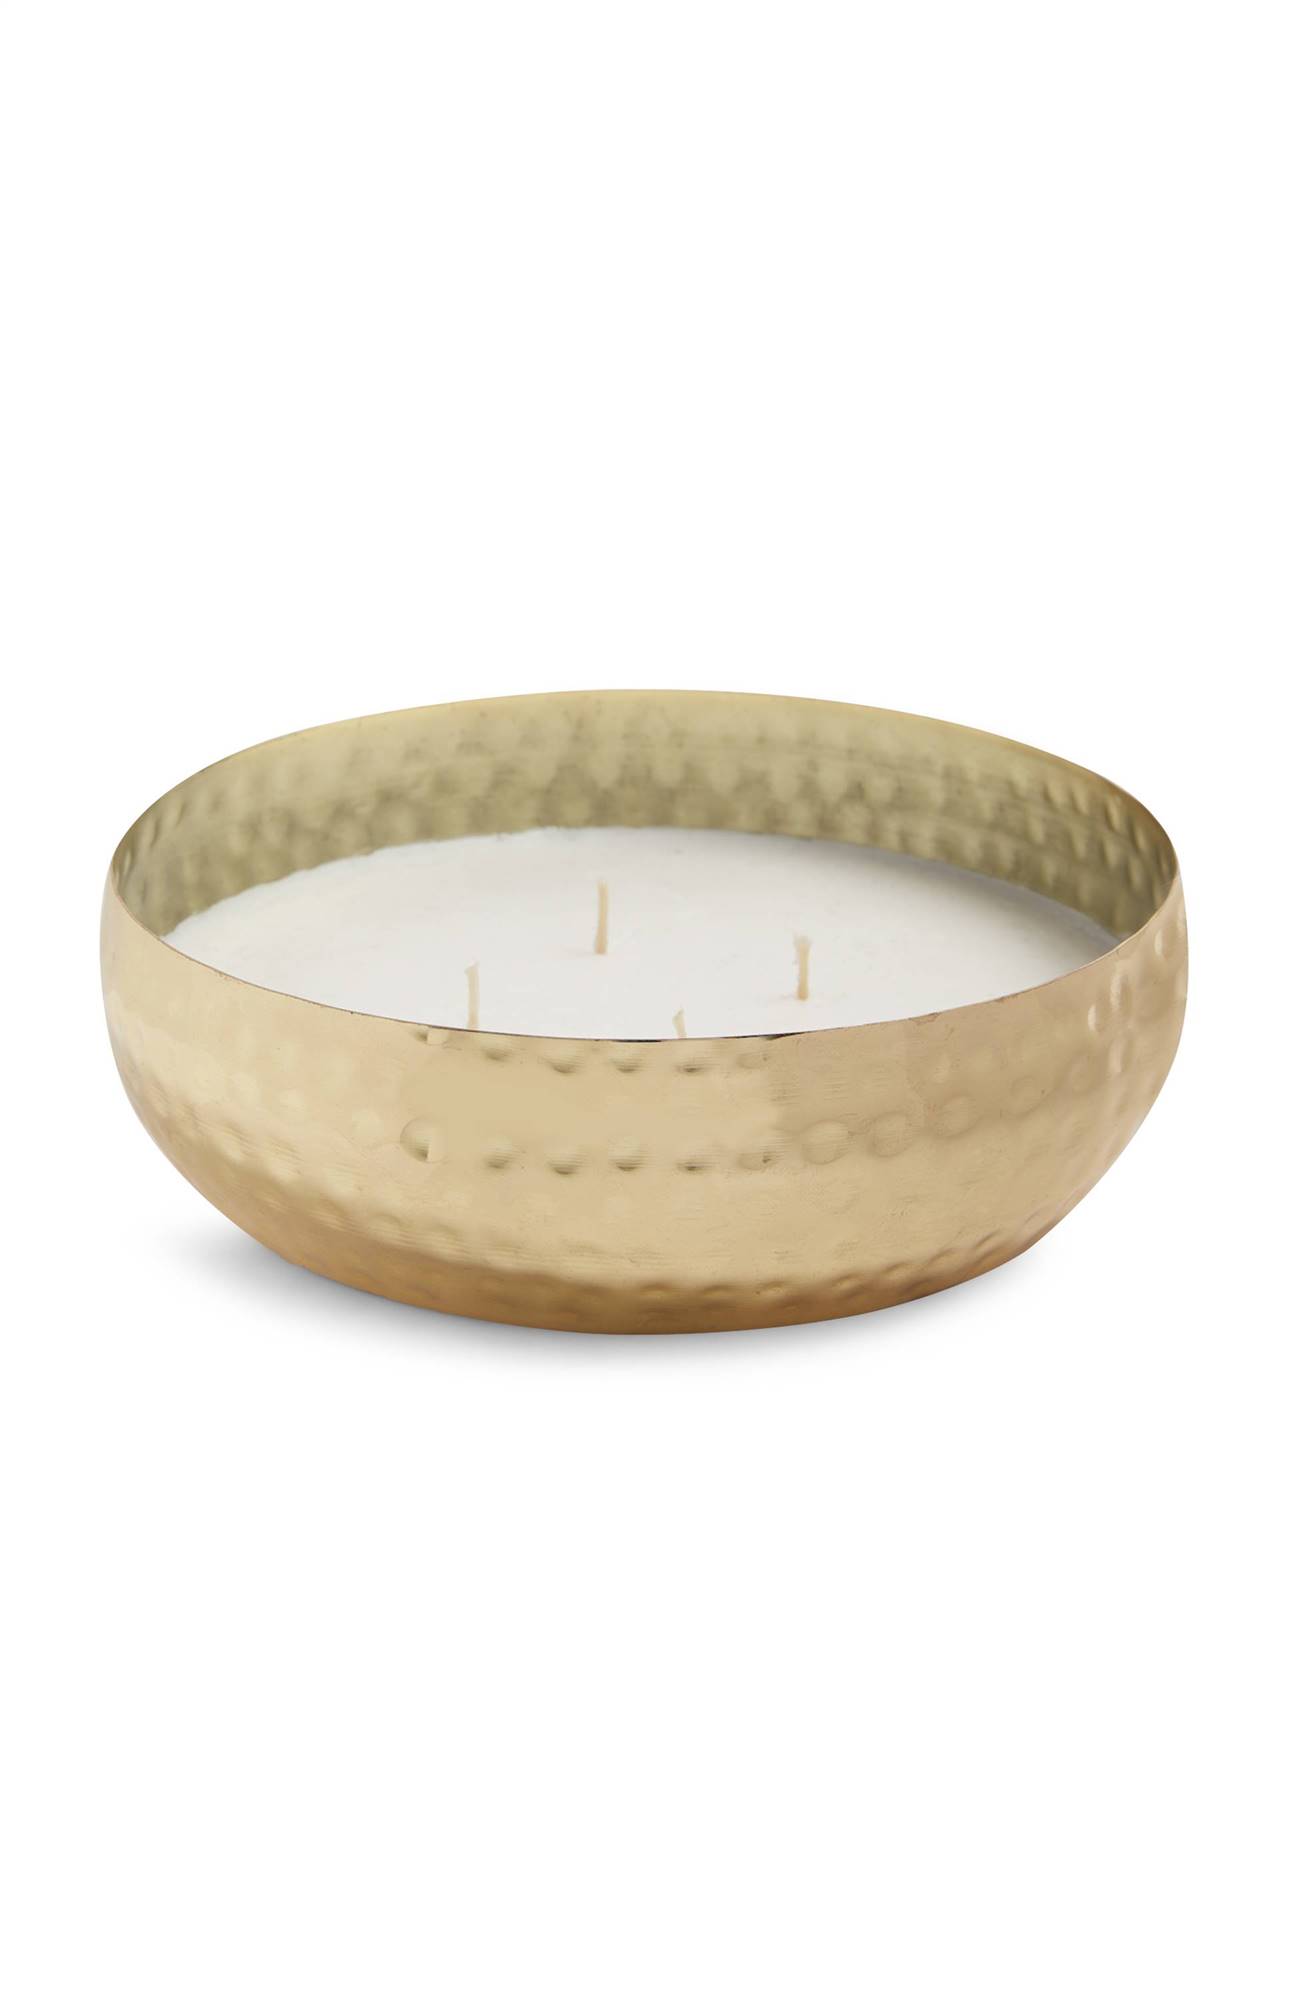 Nueva colección Primark octubre 2020. KIMBALL-0171501-01-Large Hammered Gold Candle £10 €12 PLN50 WK4